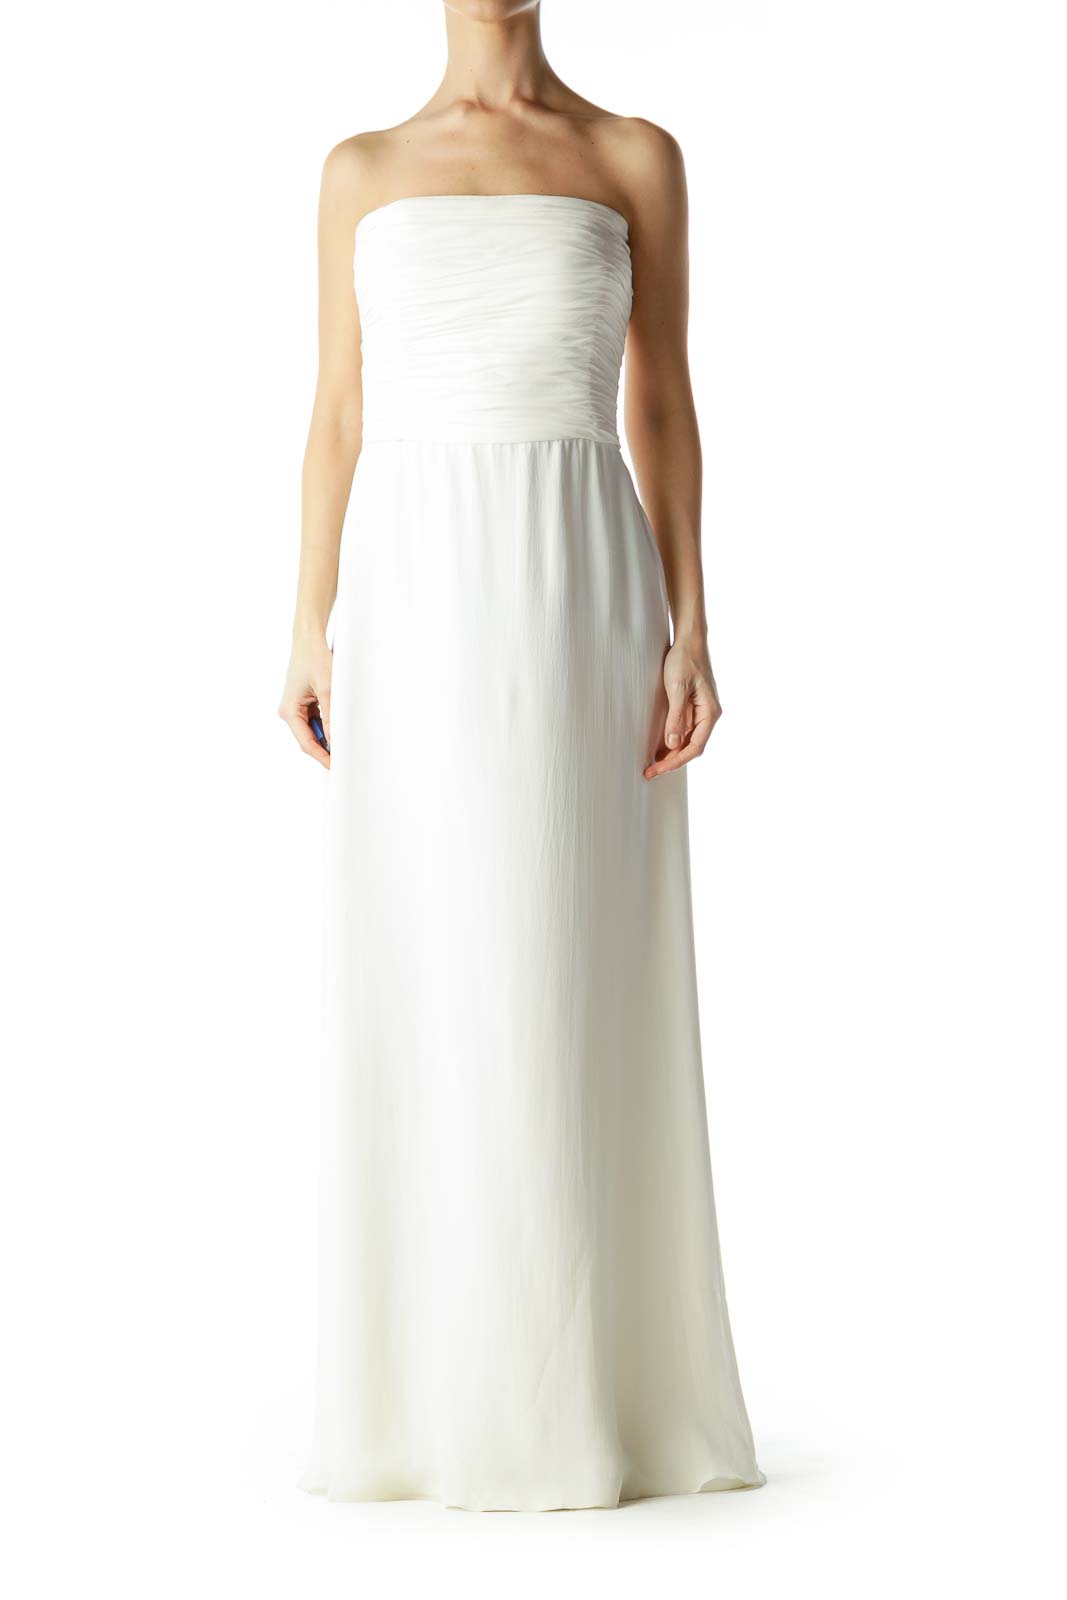 White Strapless Scrunched Evening Dress Front